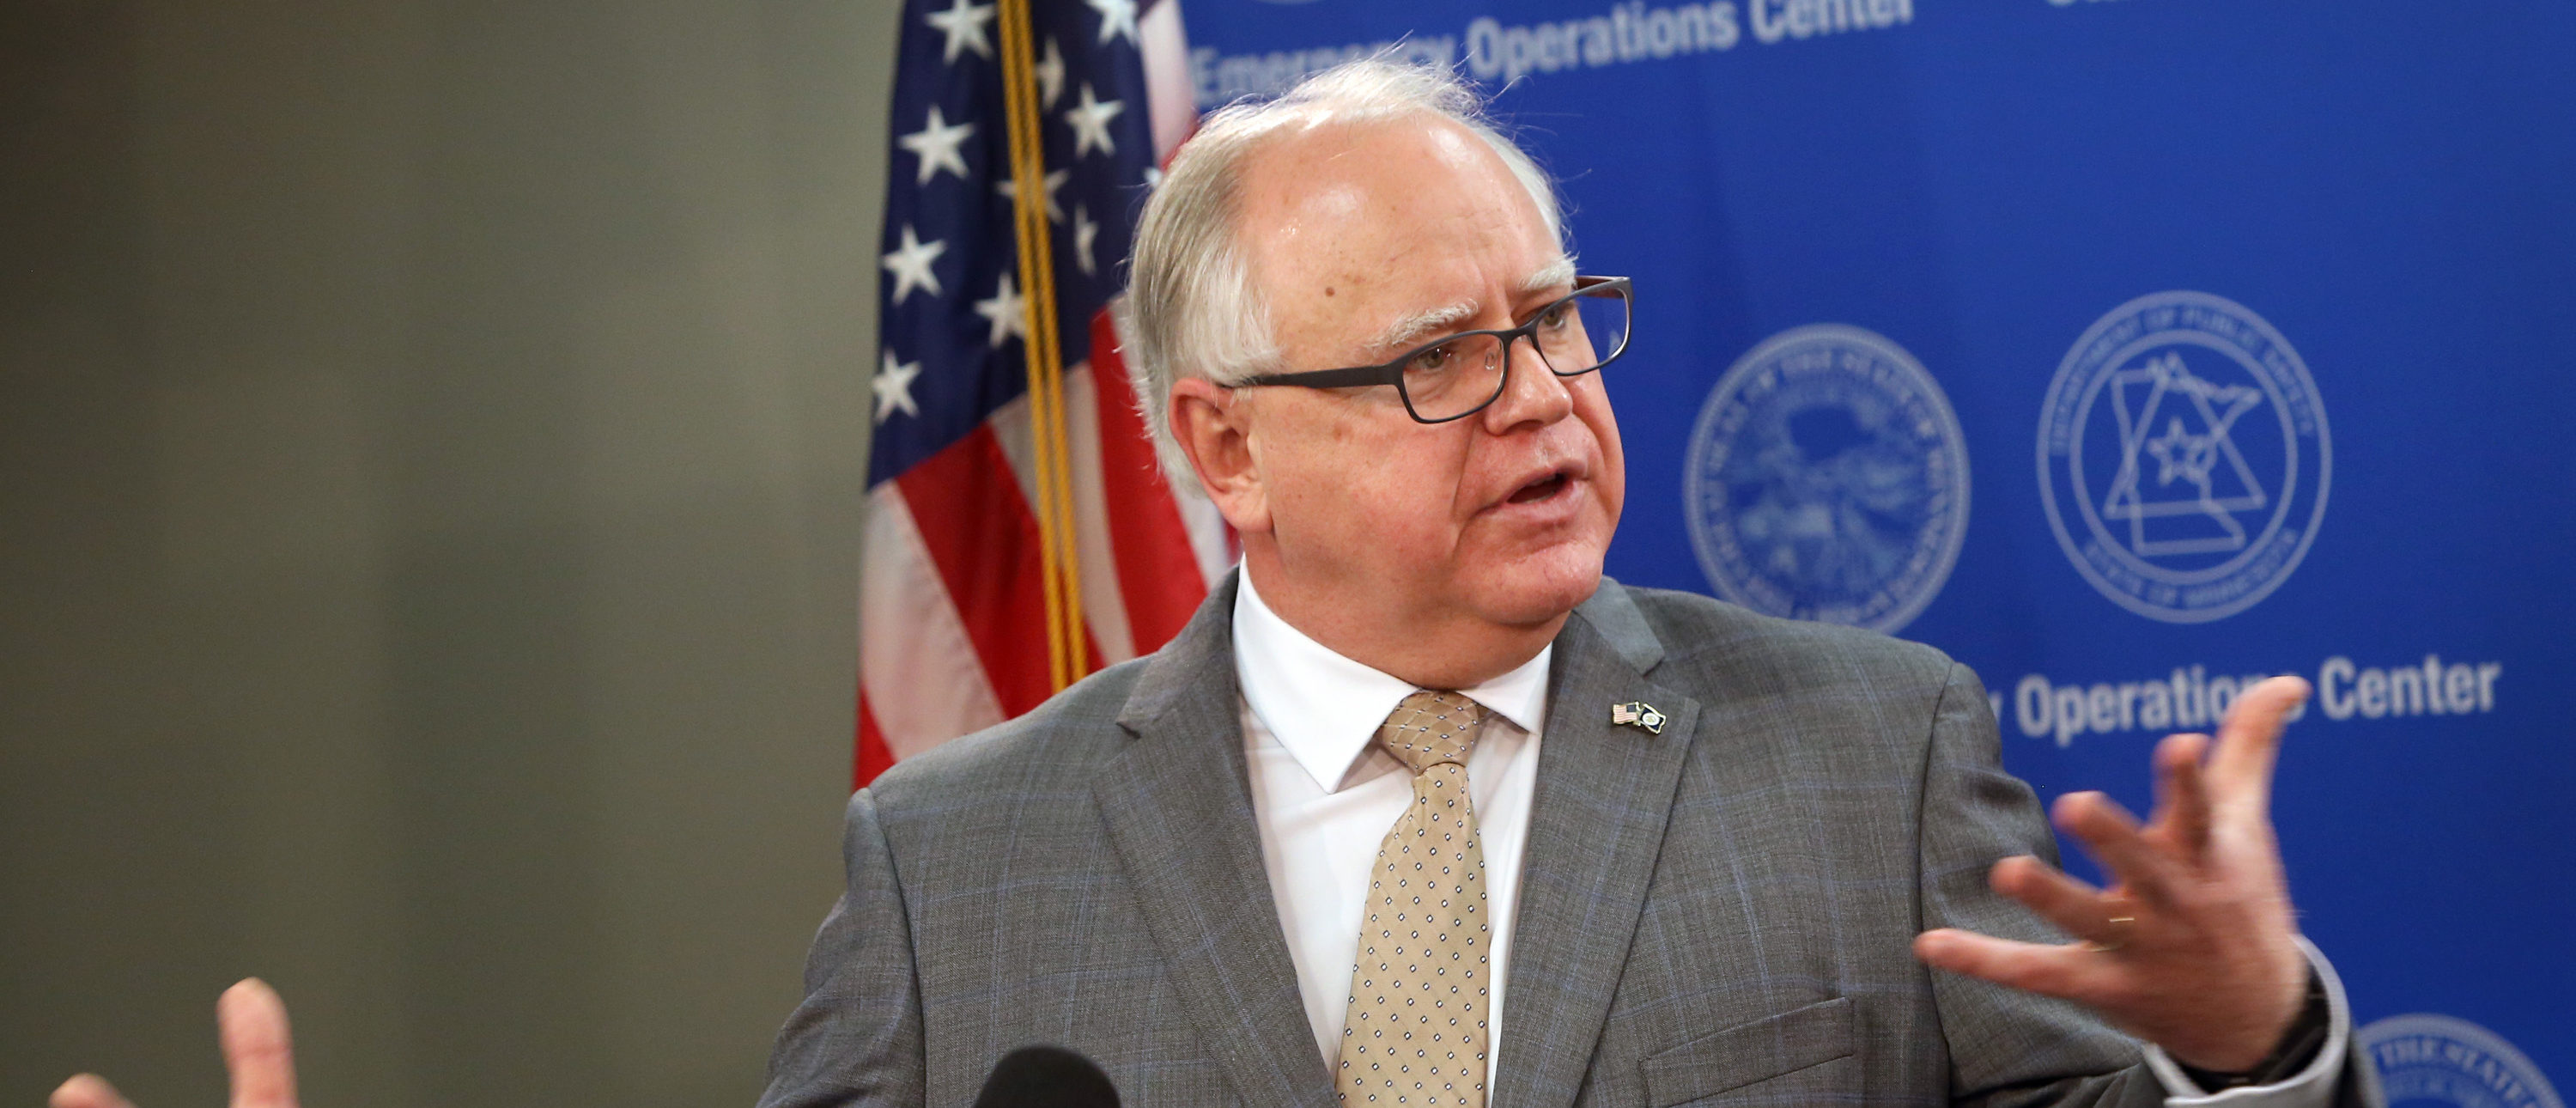 ST PAUL, MINNESOTA - JUNE 03: Minnesota Governor Tim Walz speaks to the press on June 3, 2020 in St. Paul, Minnesota. Earlier today the state's Attorney General Keith Ellison announced that charges of aiding and abetting second-degree murder and aiding and abetting second-degree manslaughter had been filed against former Minneapolis police officers Thomas Lane, J. Alexander Kueng, and Tou Thao in the death of George Floyd. Ellison also announced that charges against former officer Derek Chauvin were upgraded to second-degree murder. On May 25, Chauvin kneeled on Floyd's neck for nine minutes while detaining him on suspicion of trying to pass a counterfeit $20 bill. Floyd went unconscious and died at the scene. The other officer were part of the responding team. (Photo by Scott Olson/Getty Images)